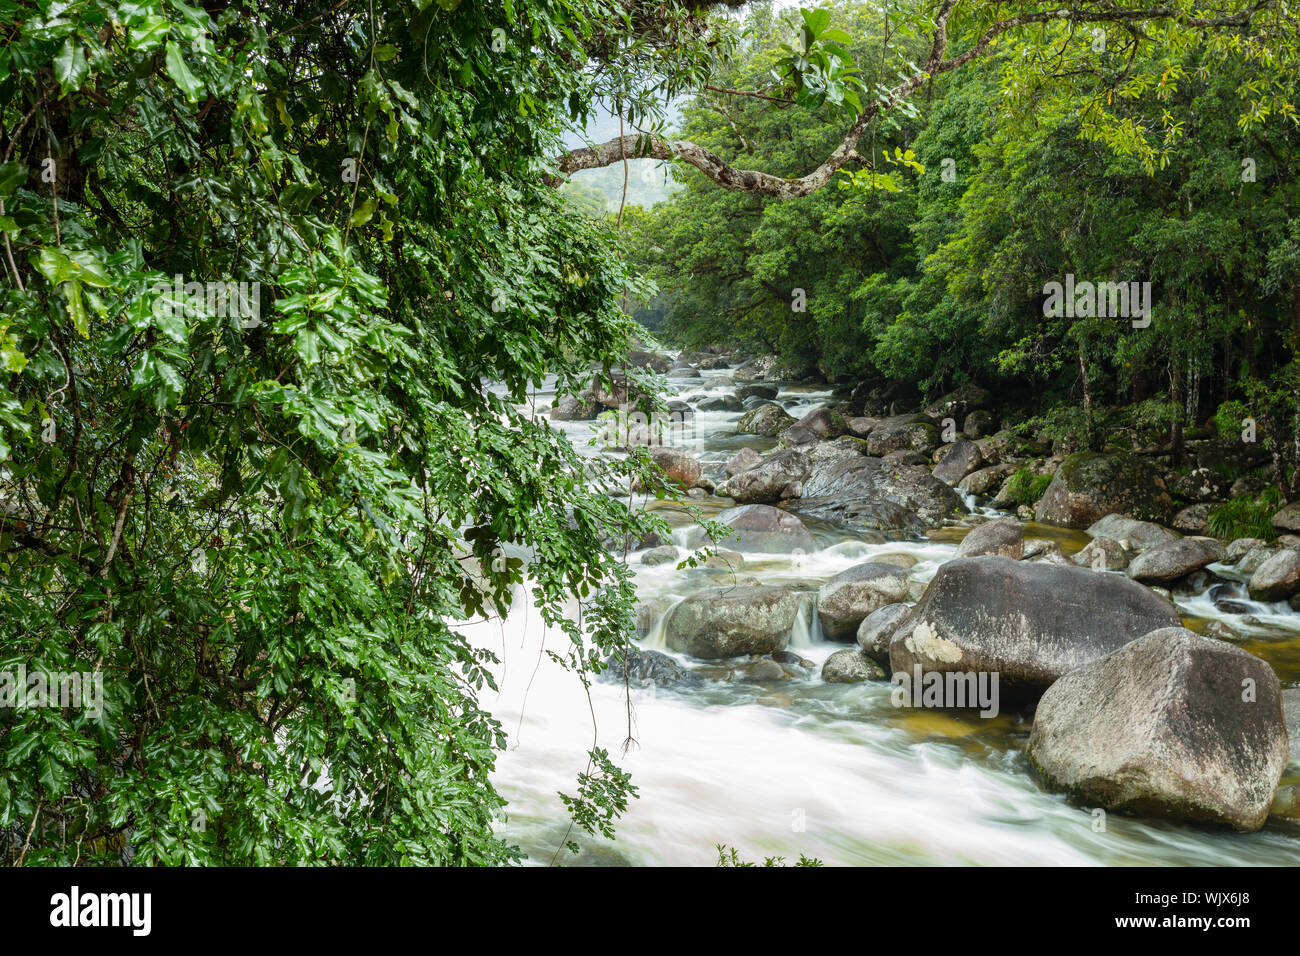 Mossman, Queensland, Australia. The Mossman River in the lush wet rain forest of Mossman Gorge at Mossman in tropical Far North Queensland. Stock Photo